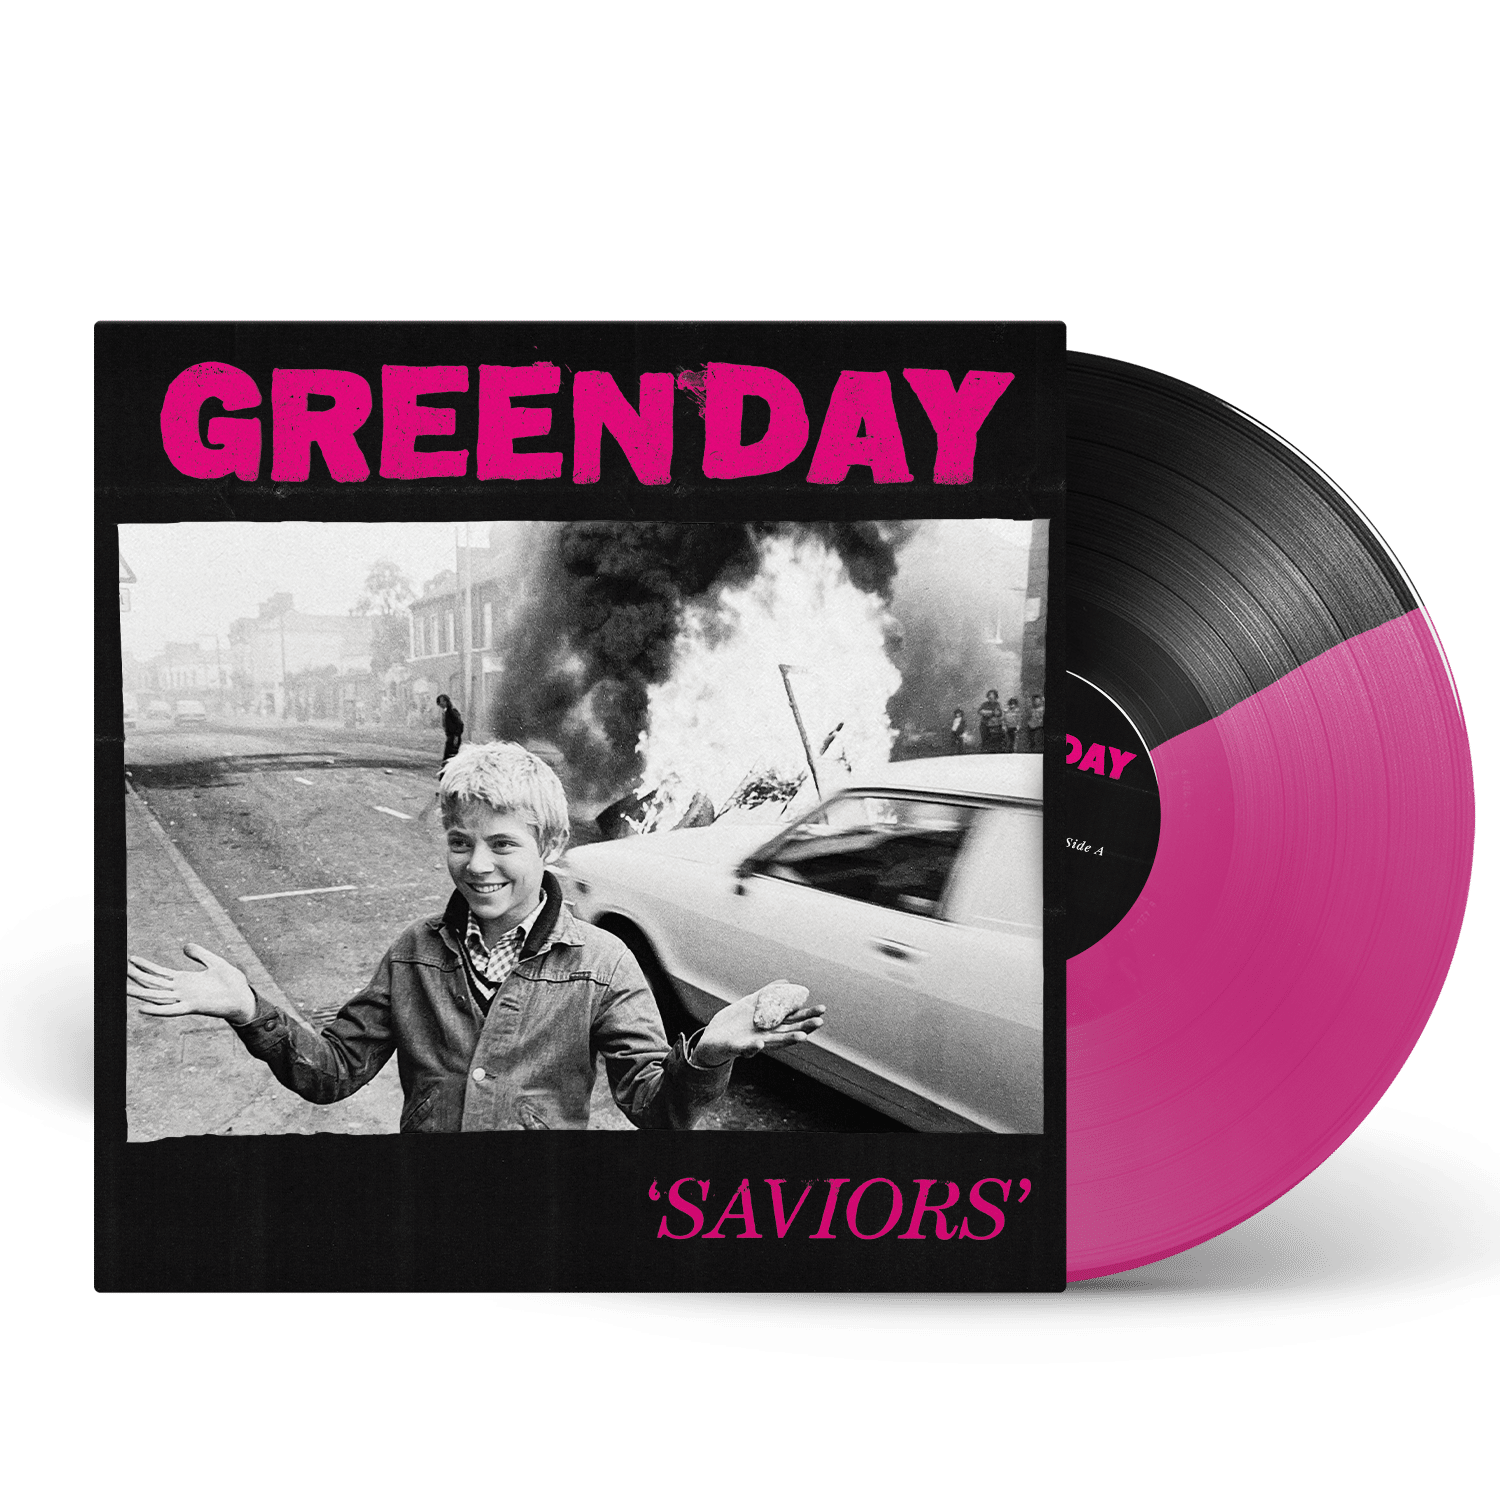 Green-Day-RSD-Stores-Pink-and-Black-Vinyl-Product-Shot.png